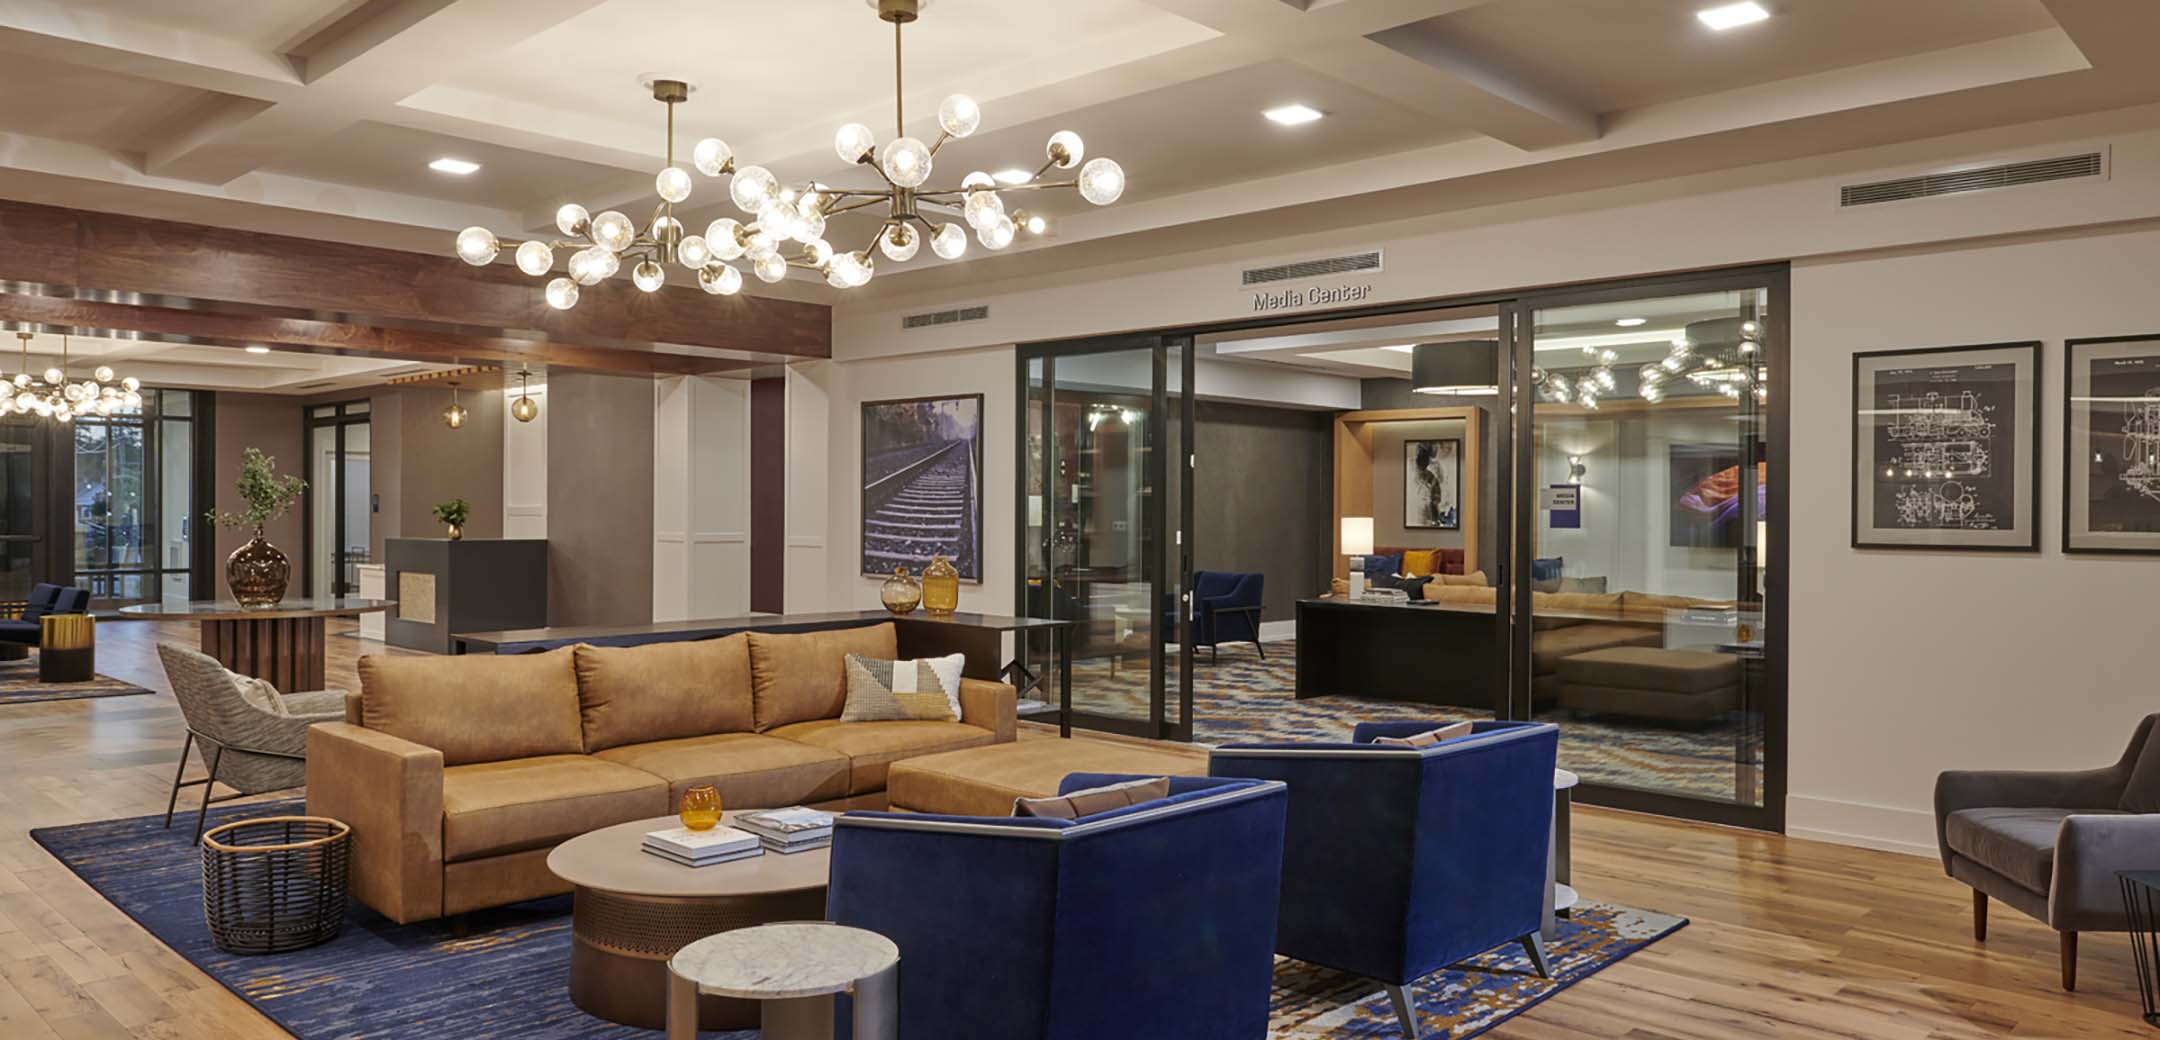 An interior view of the Airdrie building lobby, with couches and chairs in the reception sitting area and a media center room in the background.